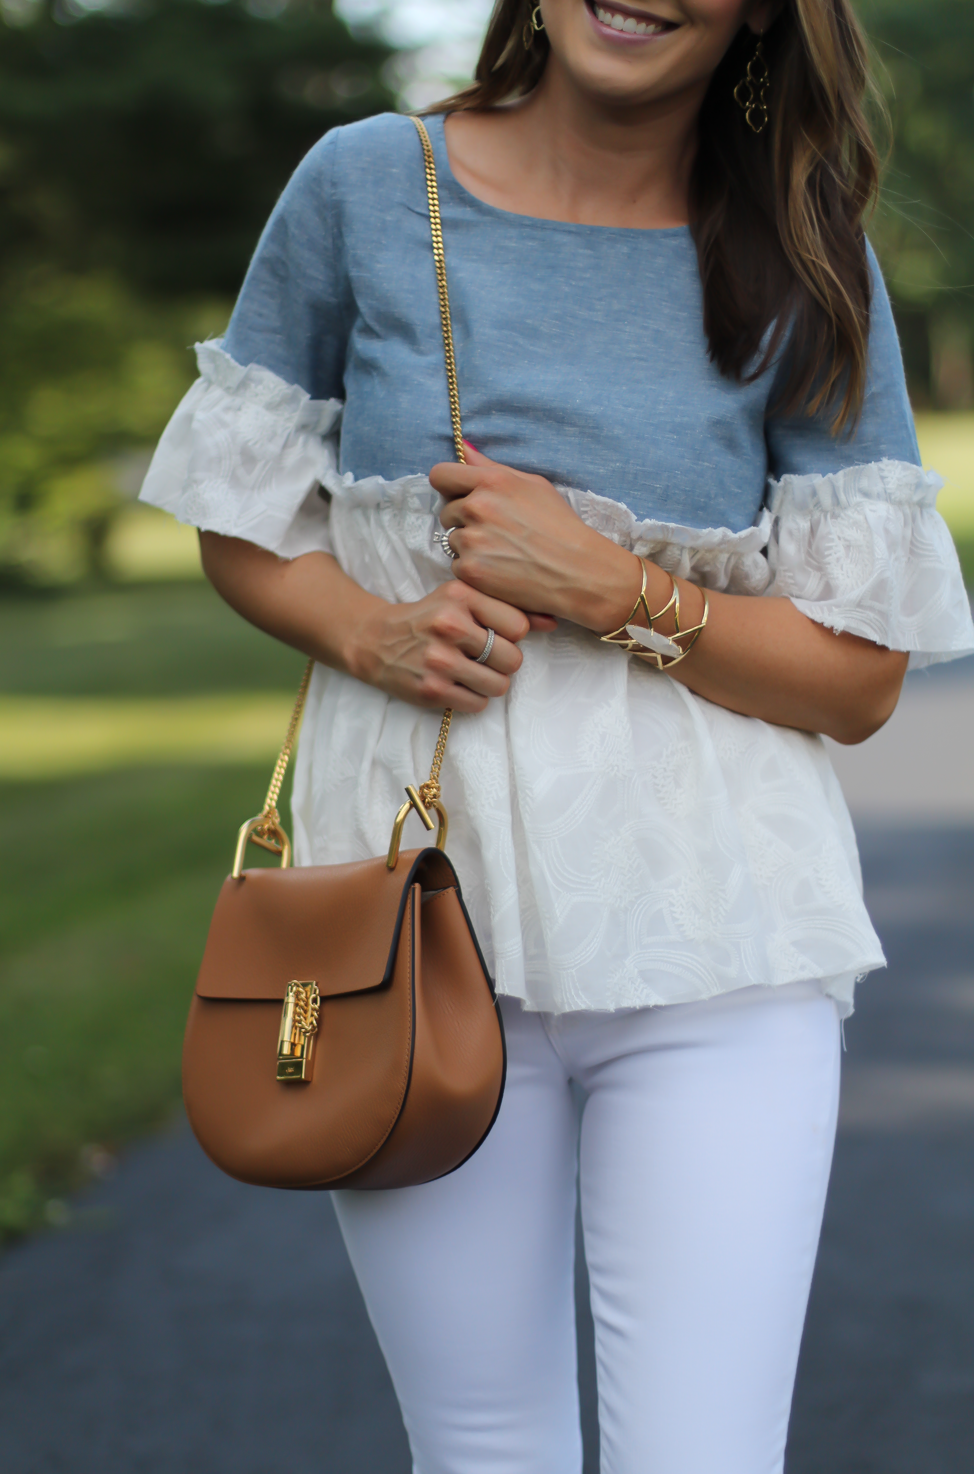 Chambray Ivory Blouse, White Skinny Crop Jeans, Tan Leather Espadrille Flats, Tan Chain Strap Crossbody, Anthropologie, J.Brand, Soludos, Chloe 12